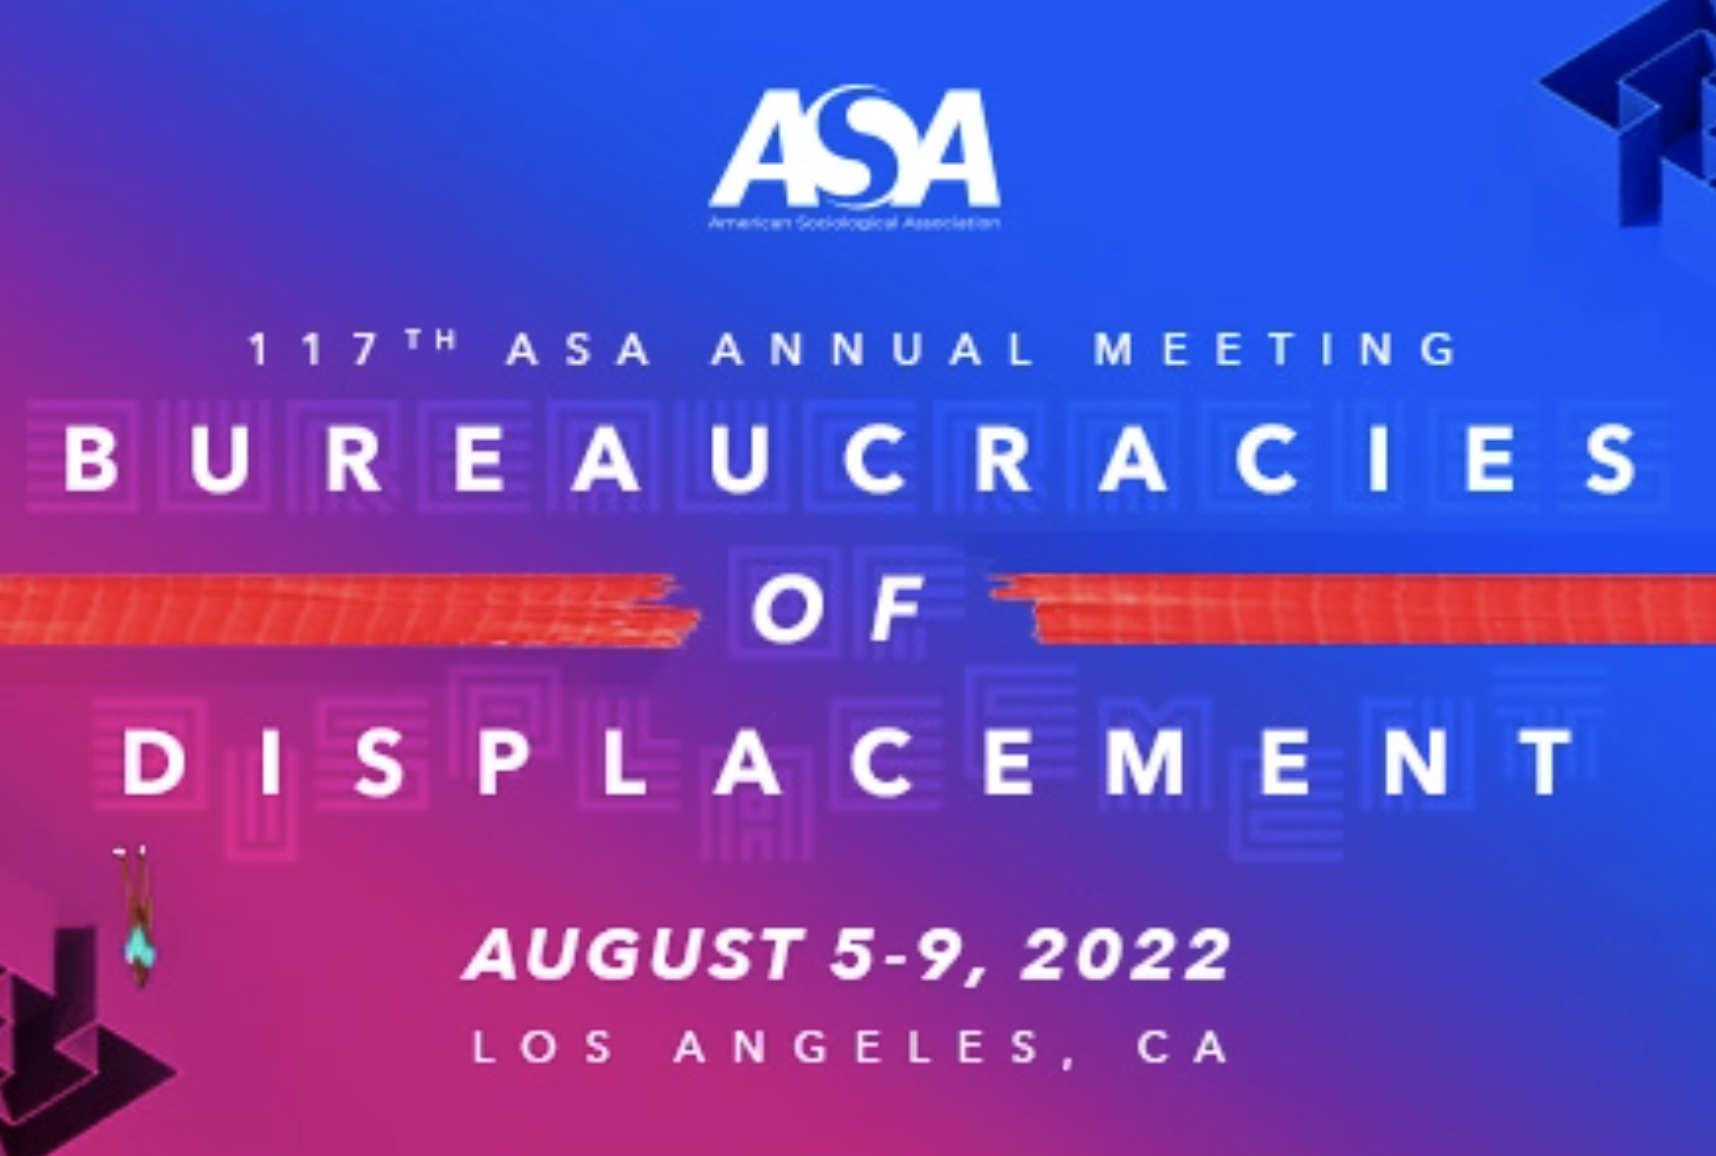 5-9 August 2022, Gianluca MANZO at the ASA annual meeting in Los Angeles